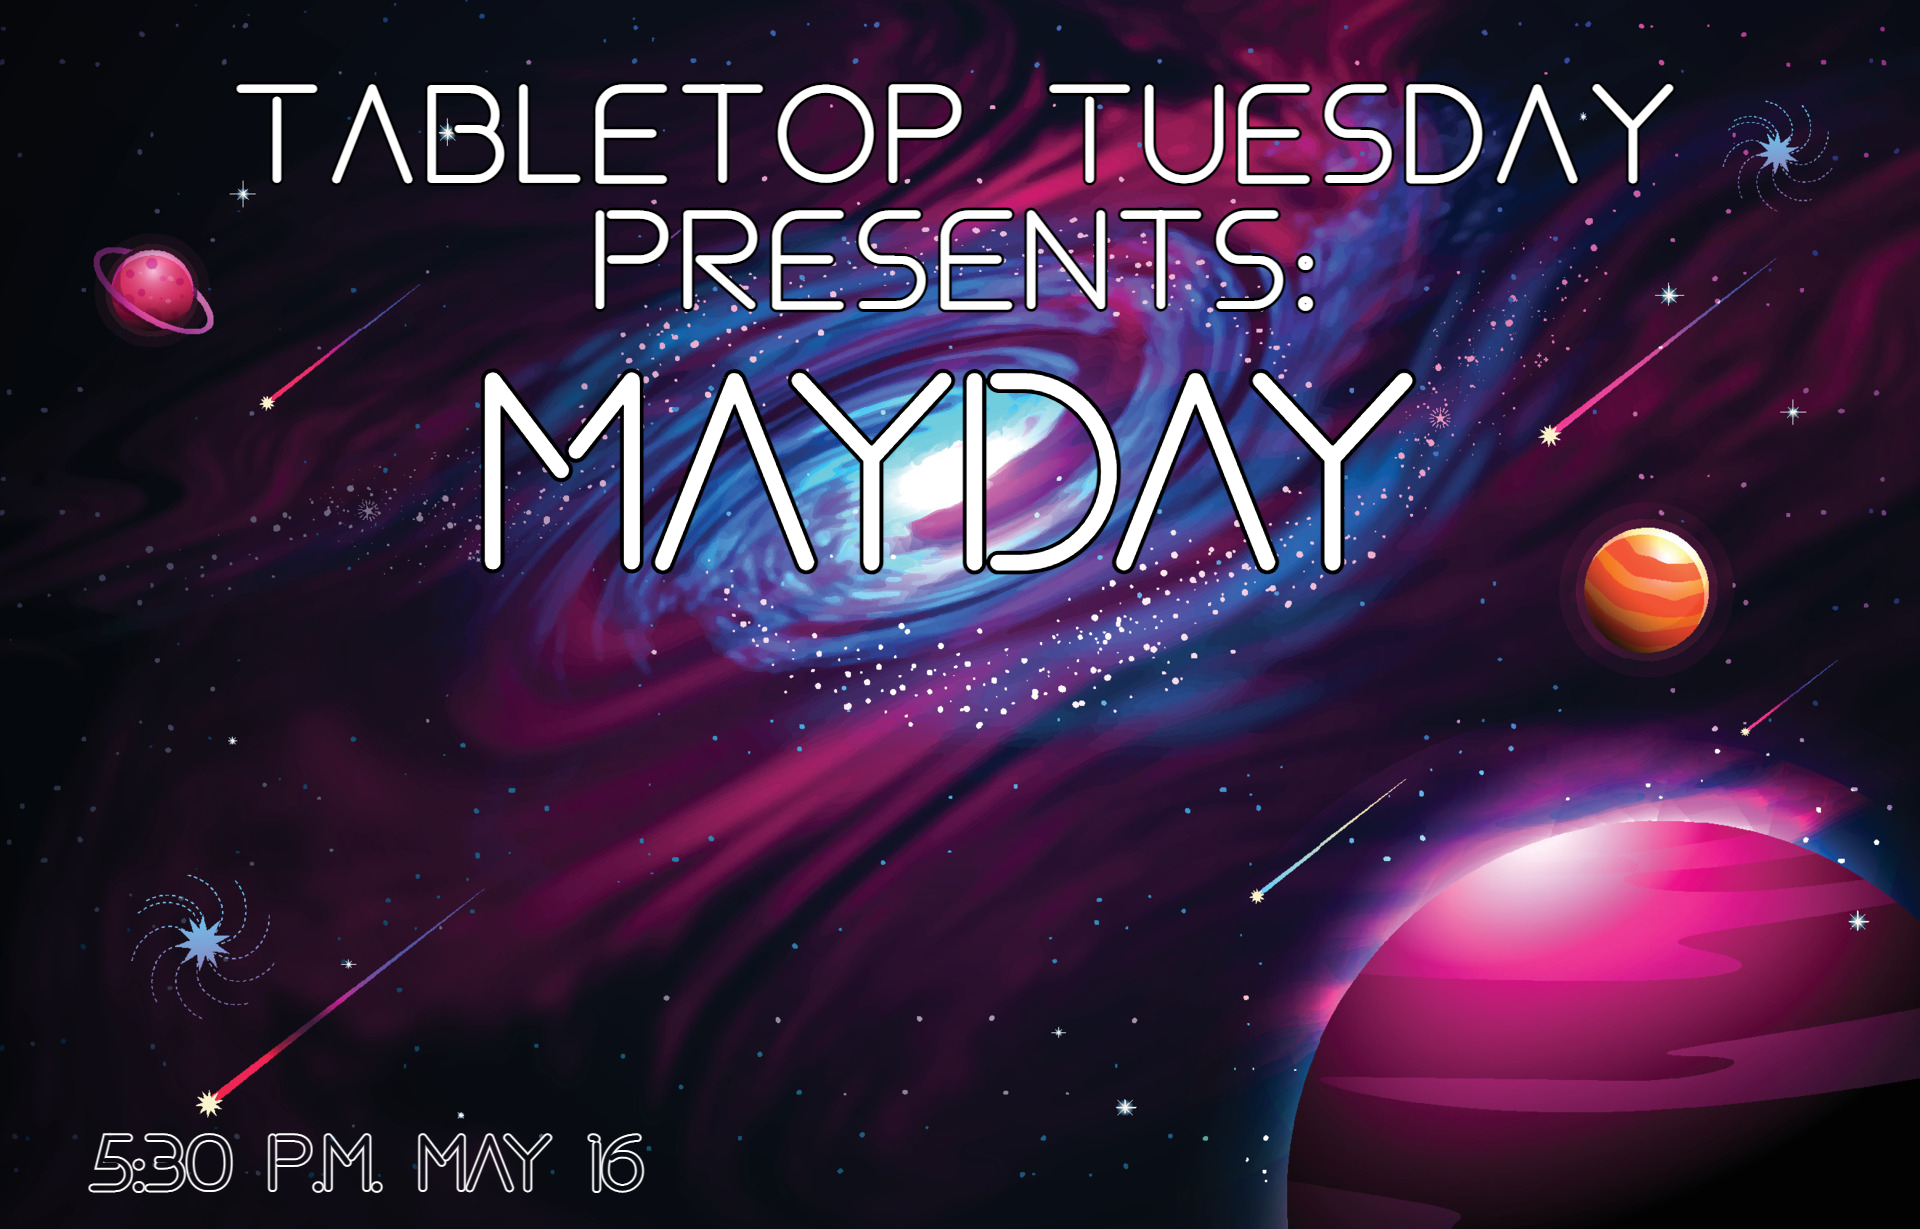 Image of a purple galaxy. The the title says: Tabletop Tuesday Presents: Mayday. At the bottom of the image is the time and date of this event.